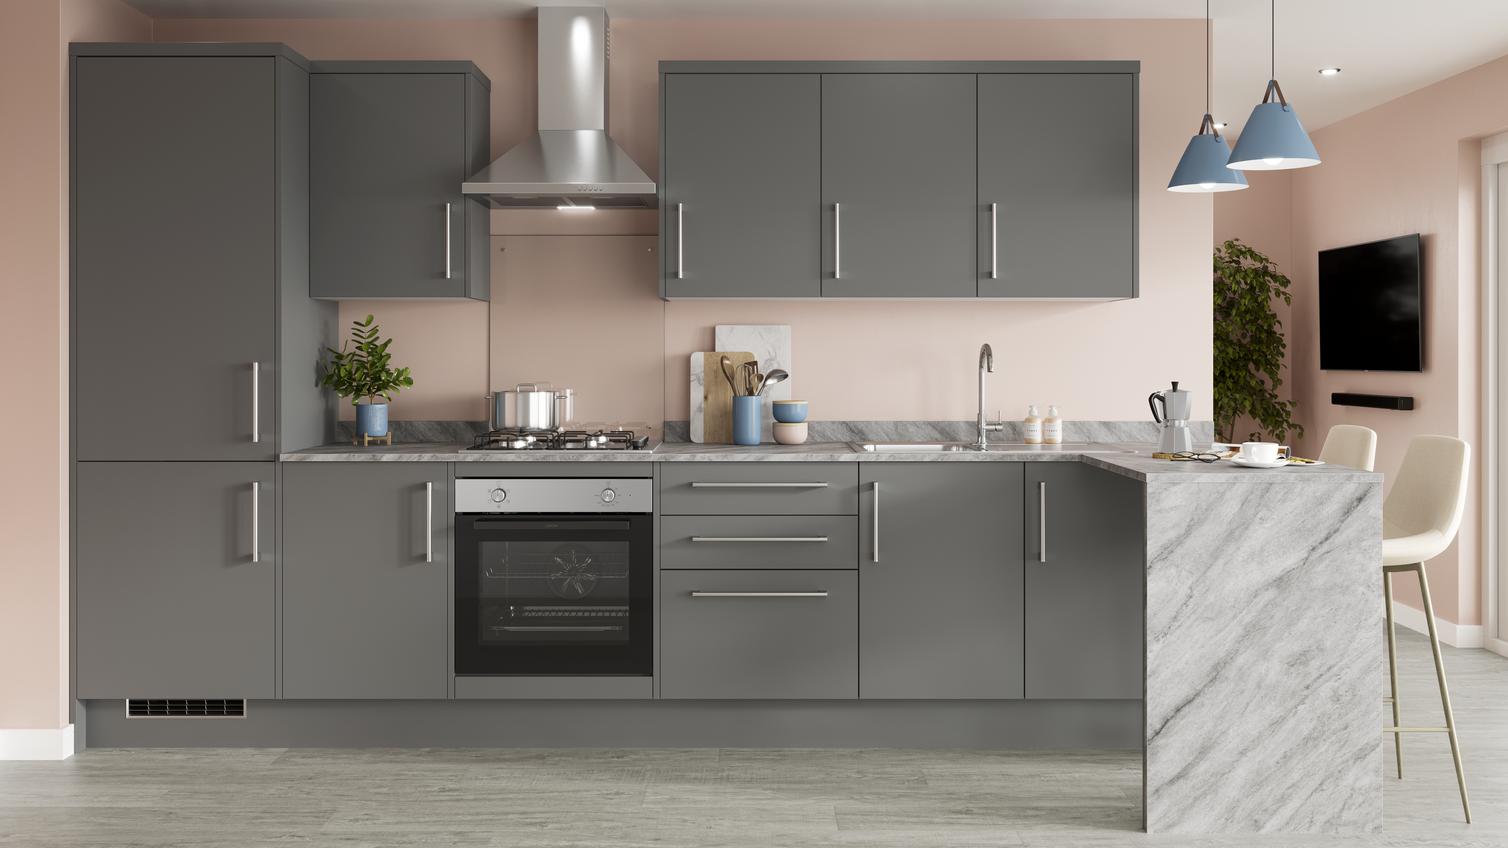 A modern grey kitchen in a l-shape layout with slab doors. Has a marble-effect breakfast bar, and a built-under oven.